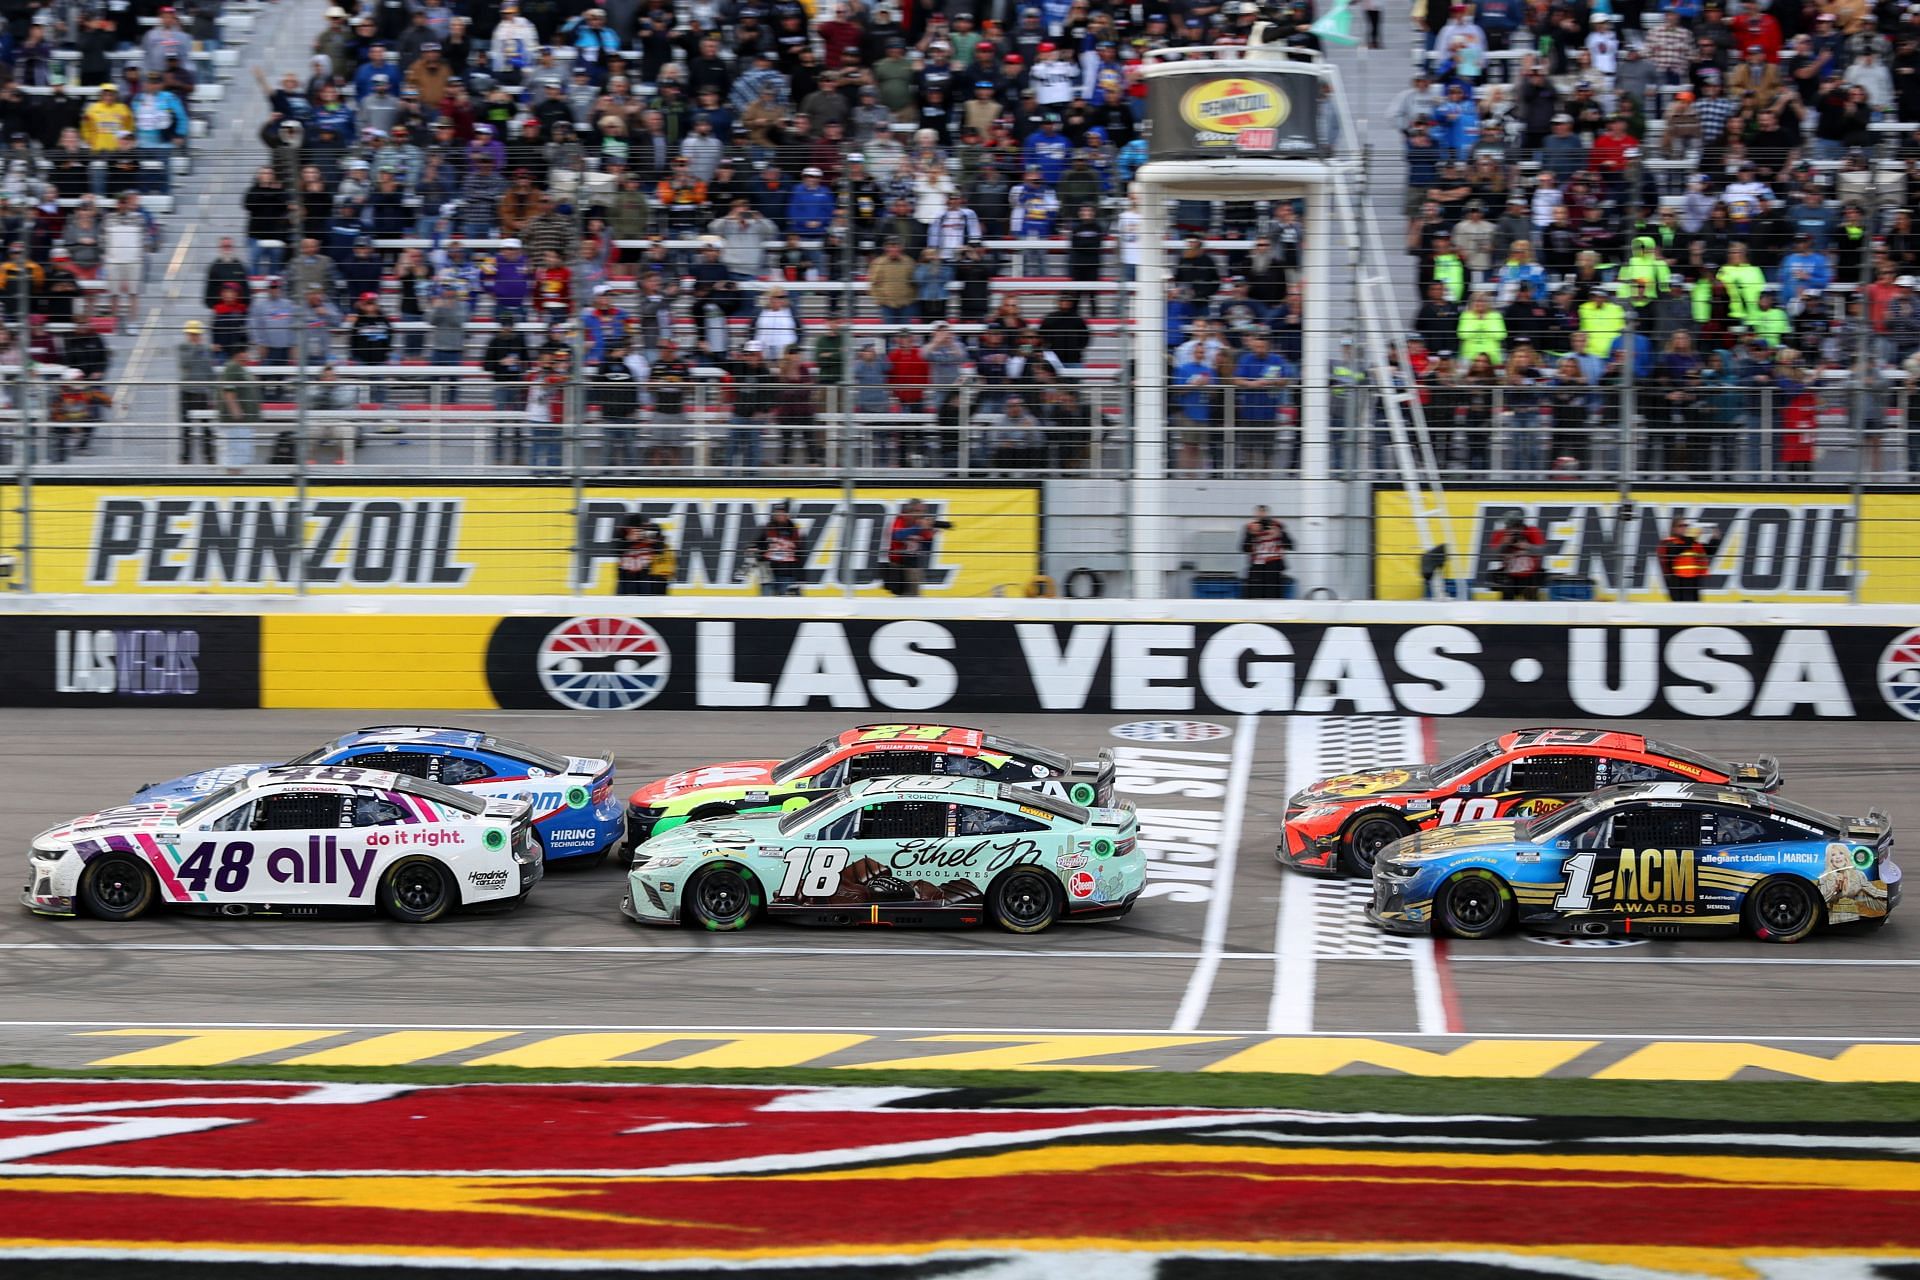 The Next Gen cars race during the NASCAR Cup Series Pennzoil 400 at Las Vegas Motor Speedway.